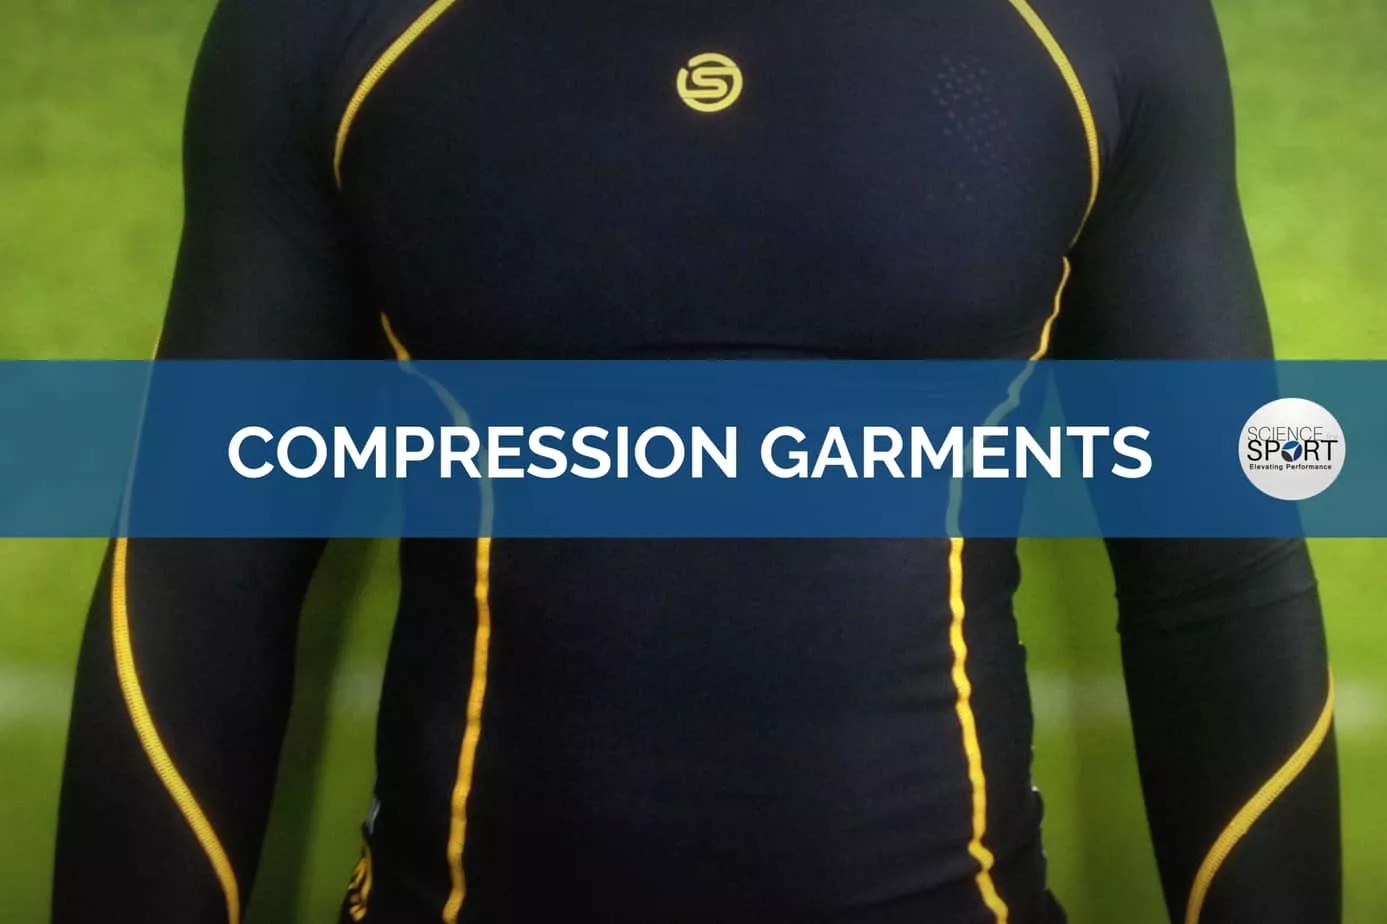 Skins Compression Clothing & Accessories